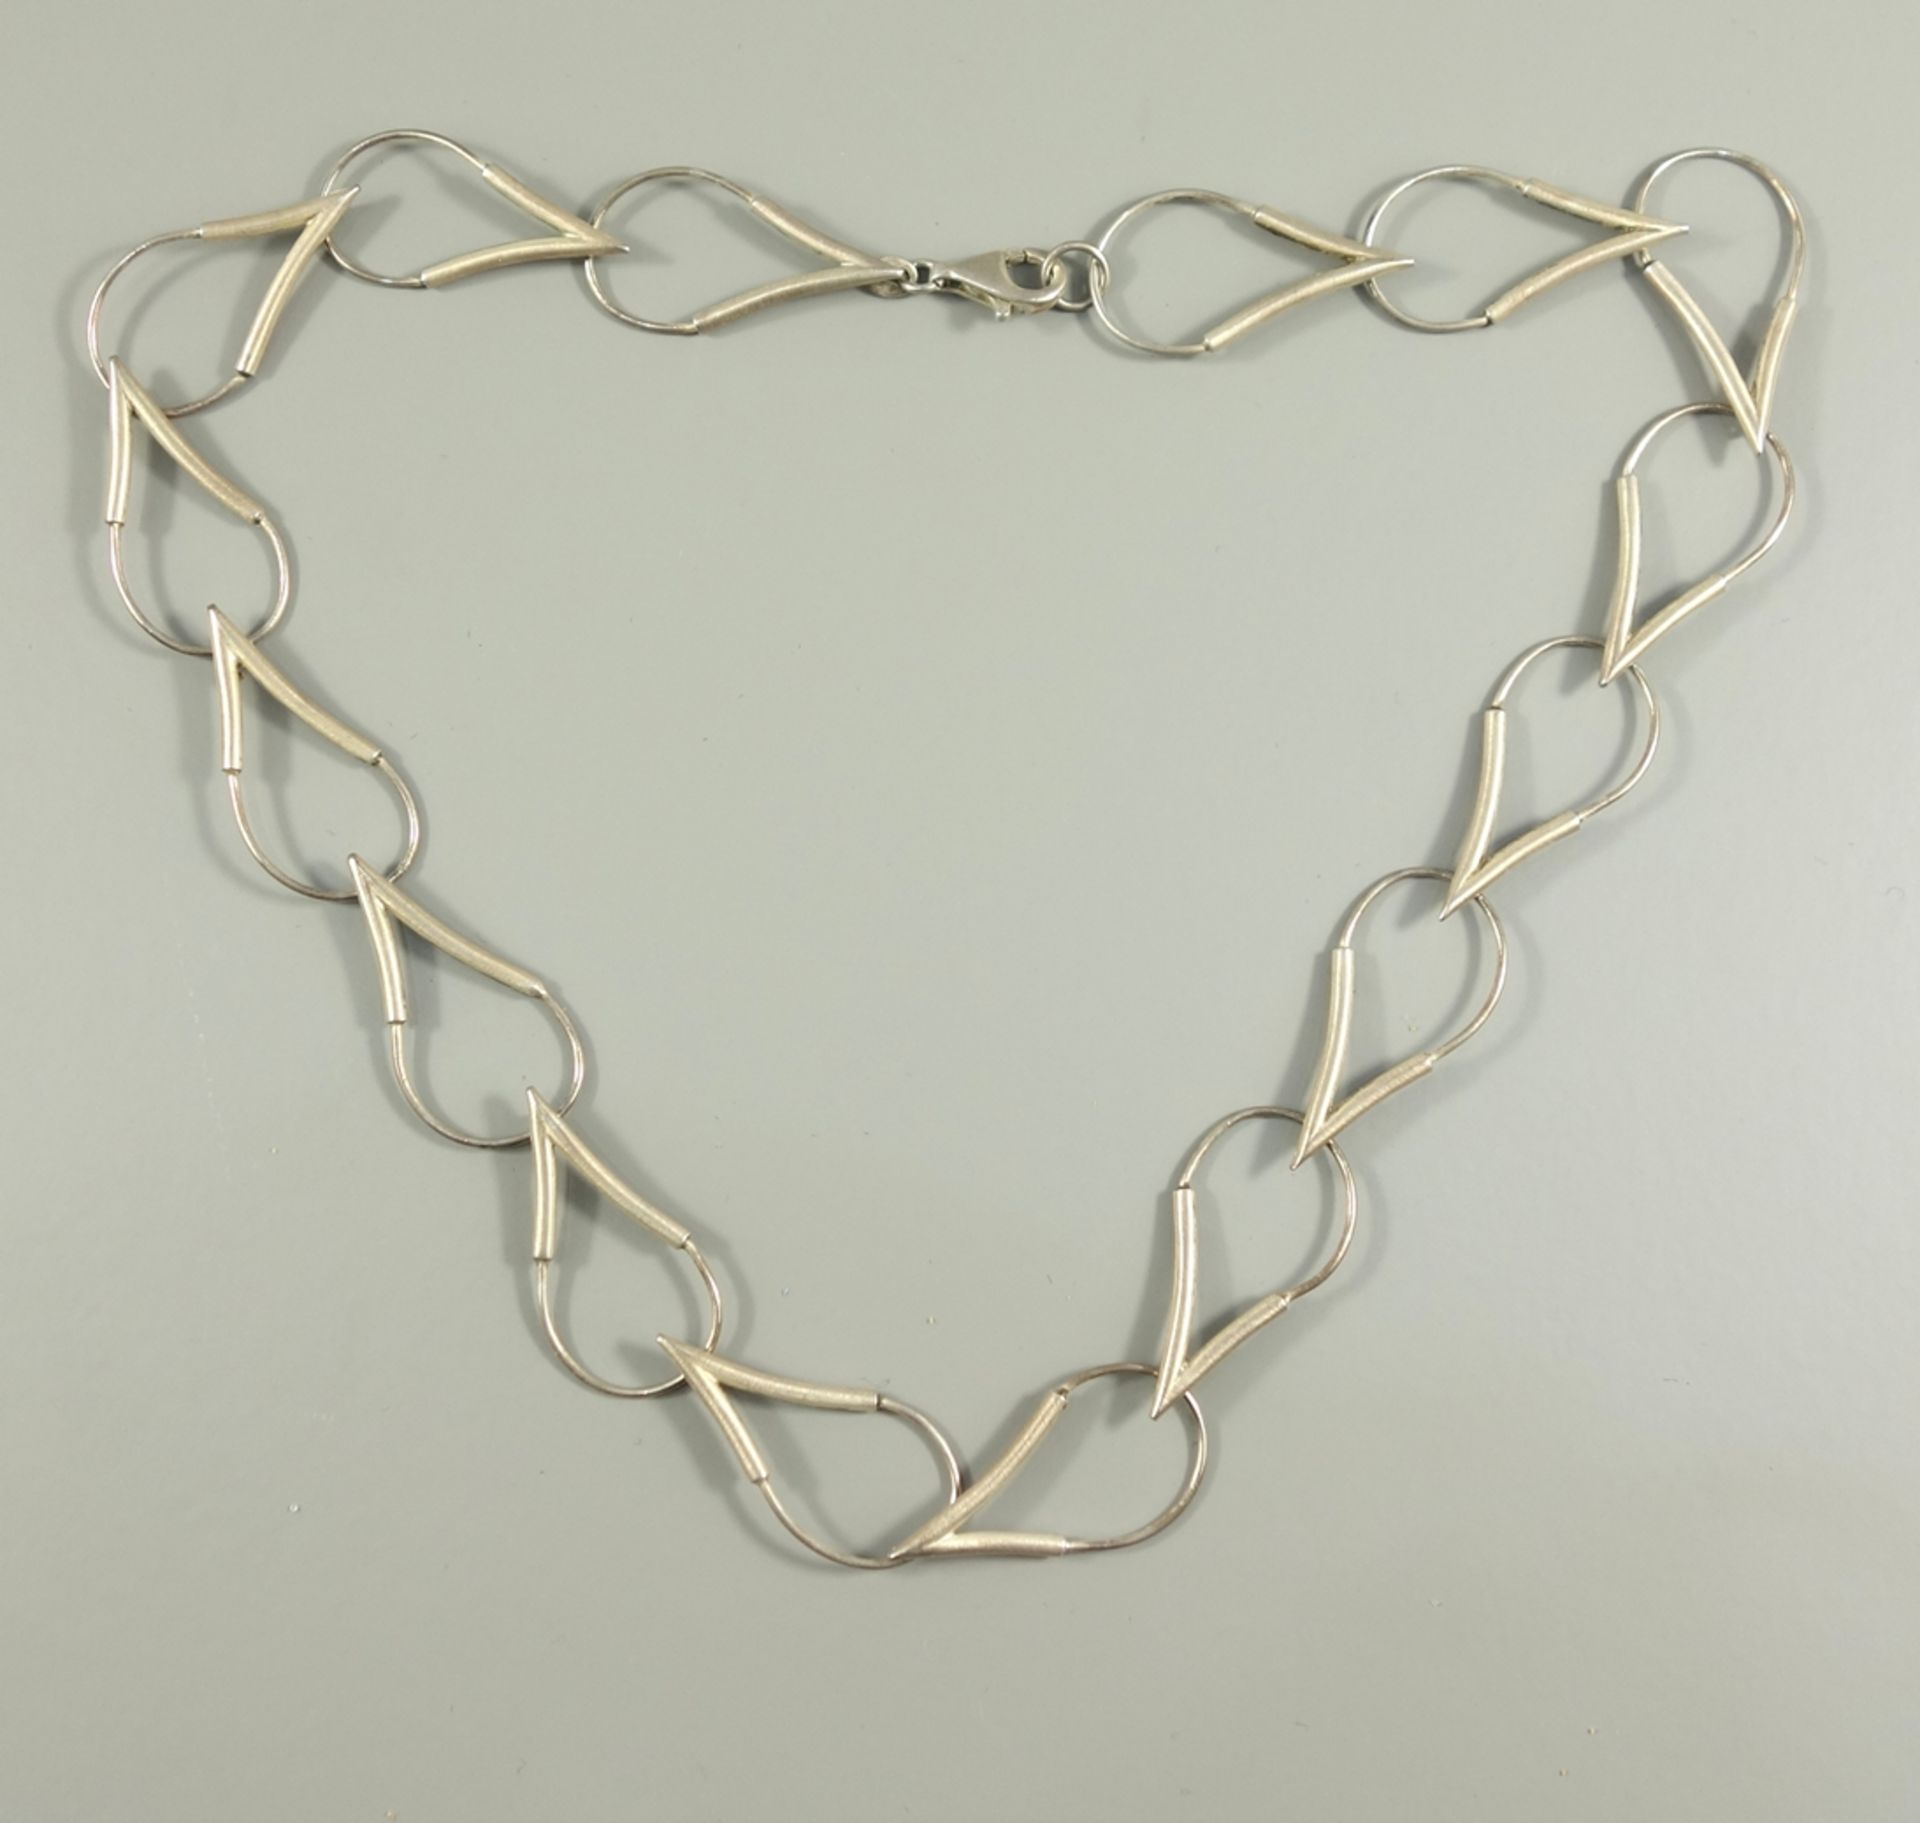 Design necklace with tapered, large chain links, 925 silver